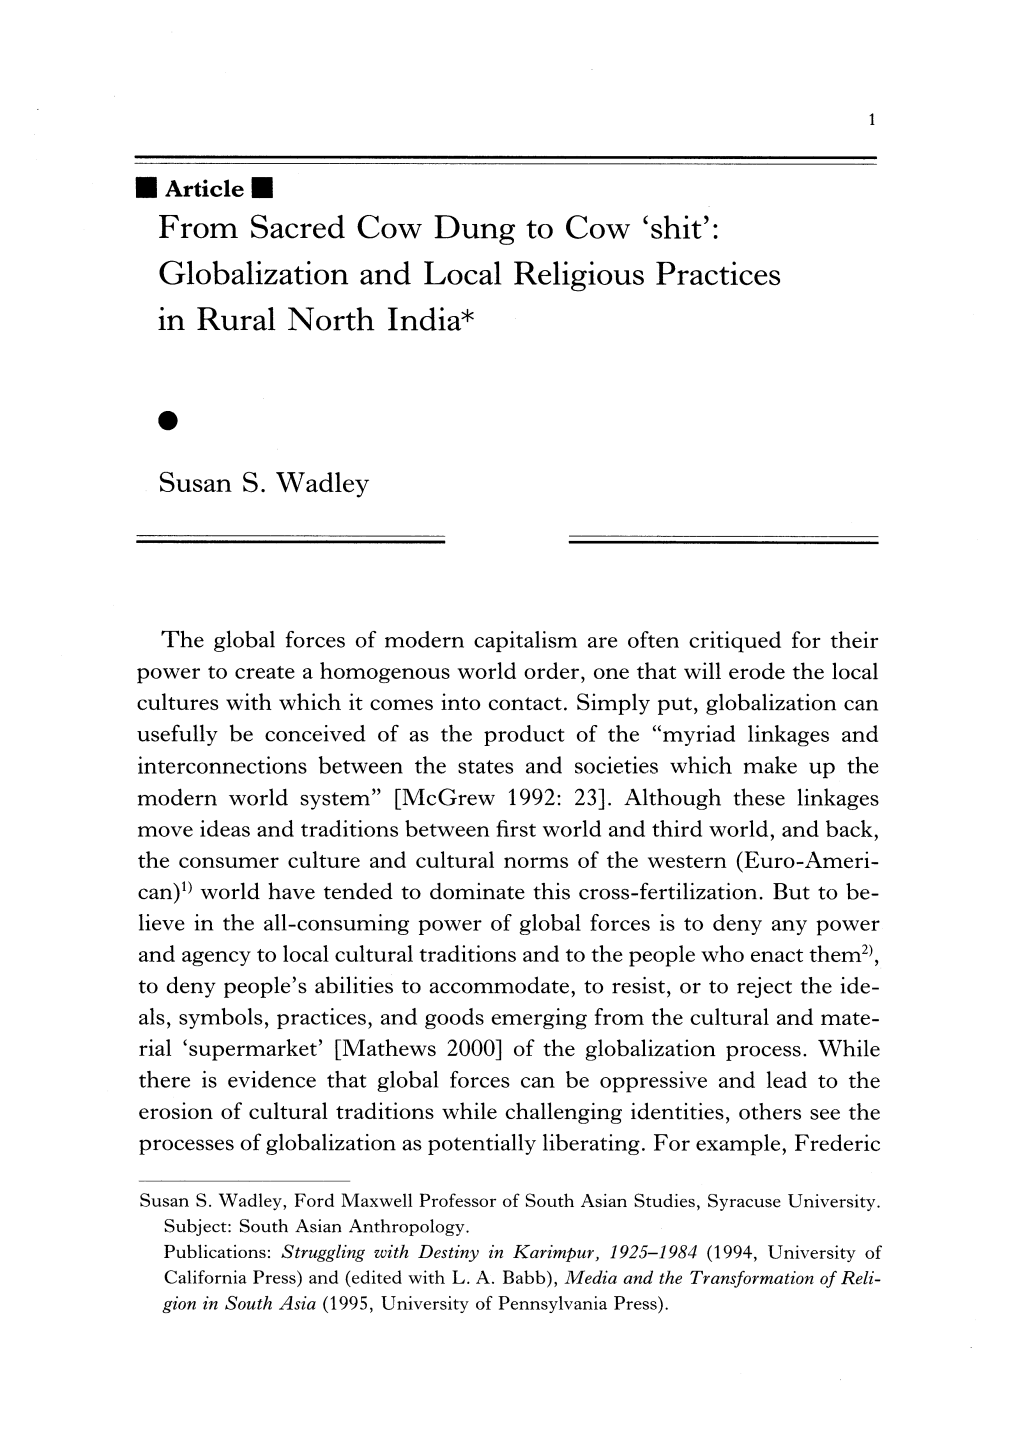 From Sacred Cow Dung to Cow 'Shit': Globalization and Local Religious Practices in Rural North India*